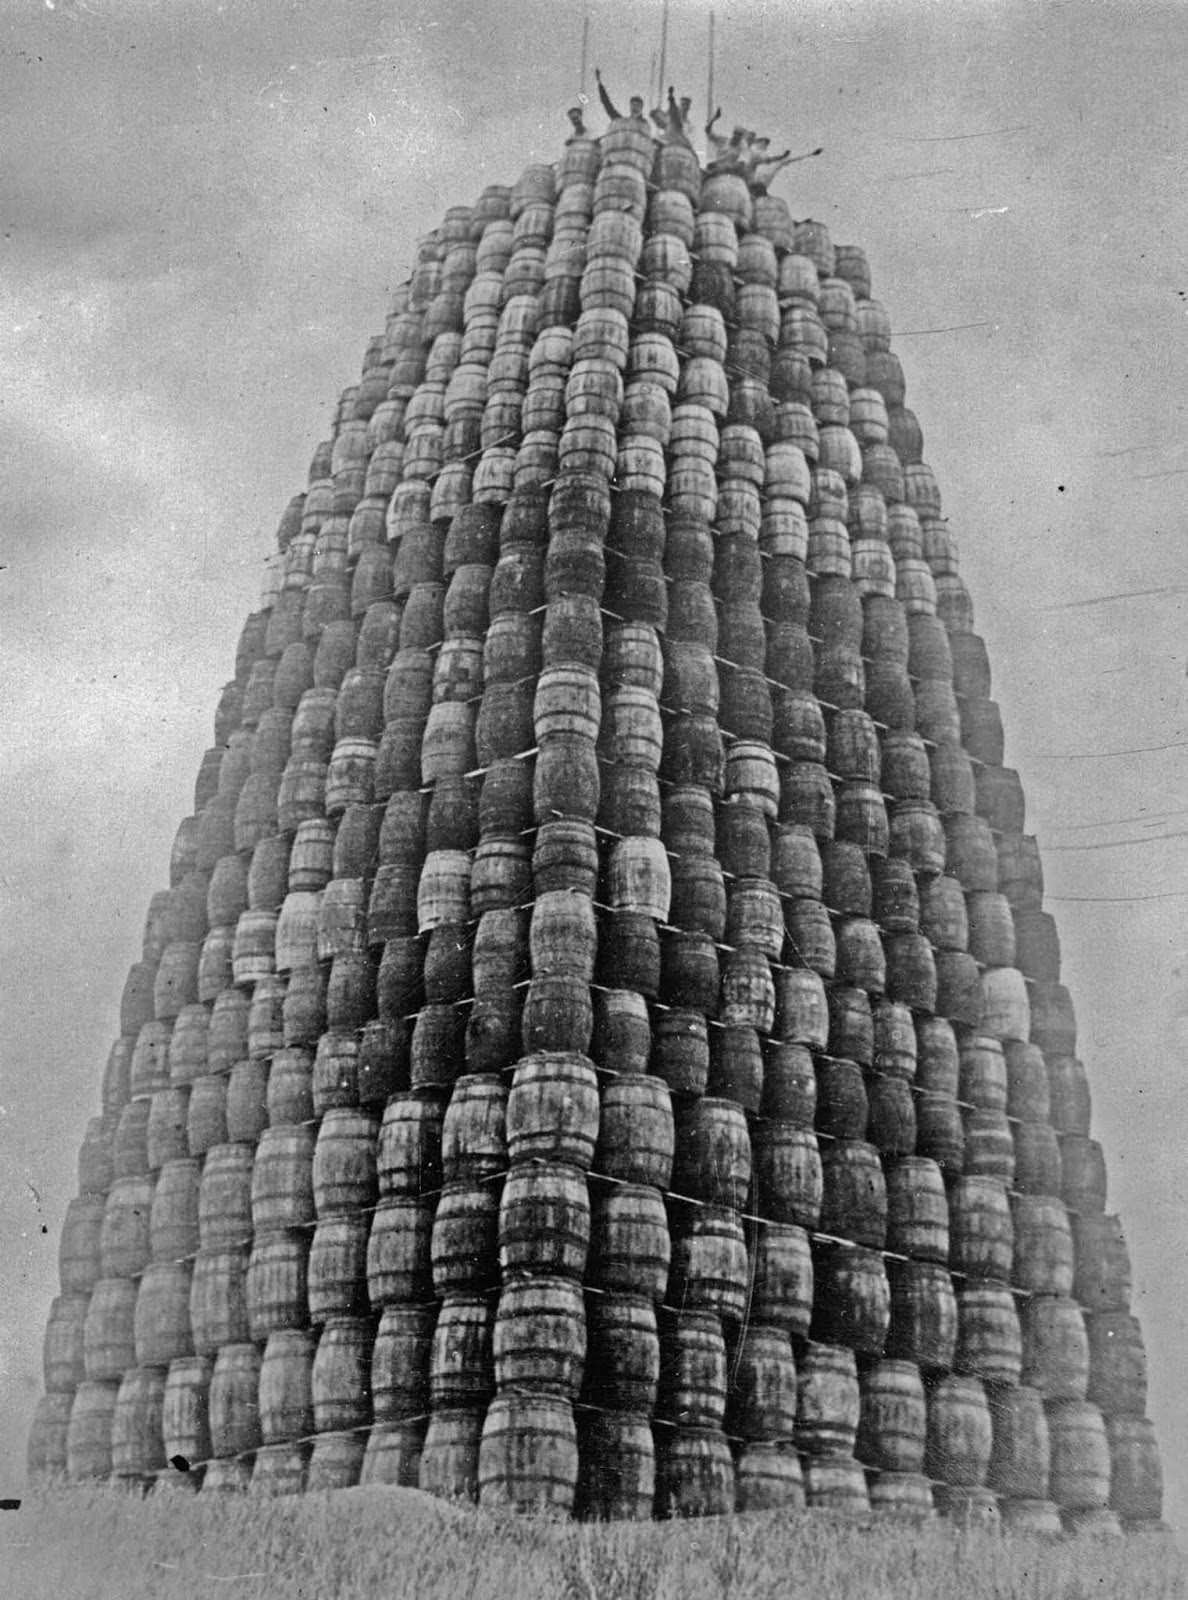 A tower built with barrels of alcohol, which will be destroyed later. 1929.